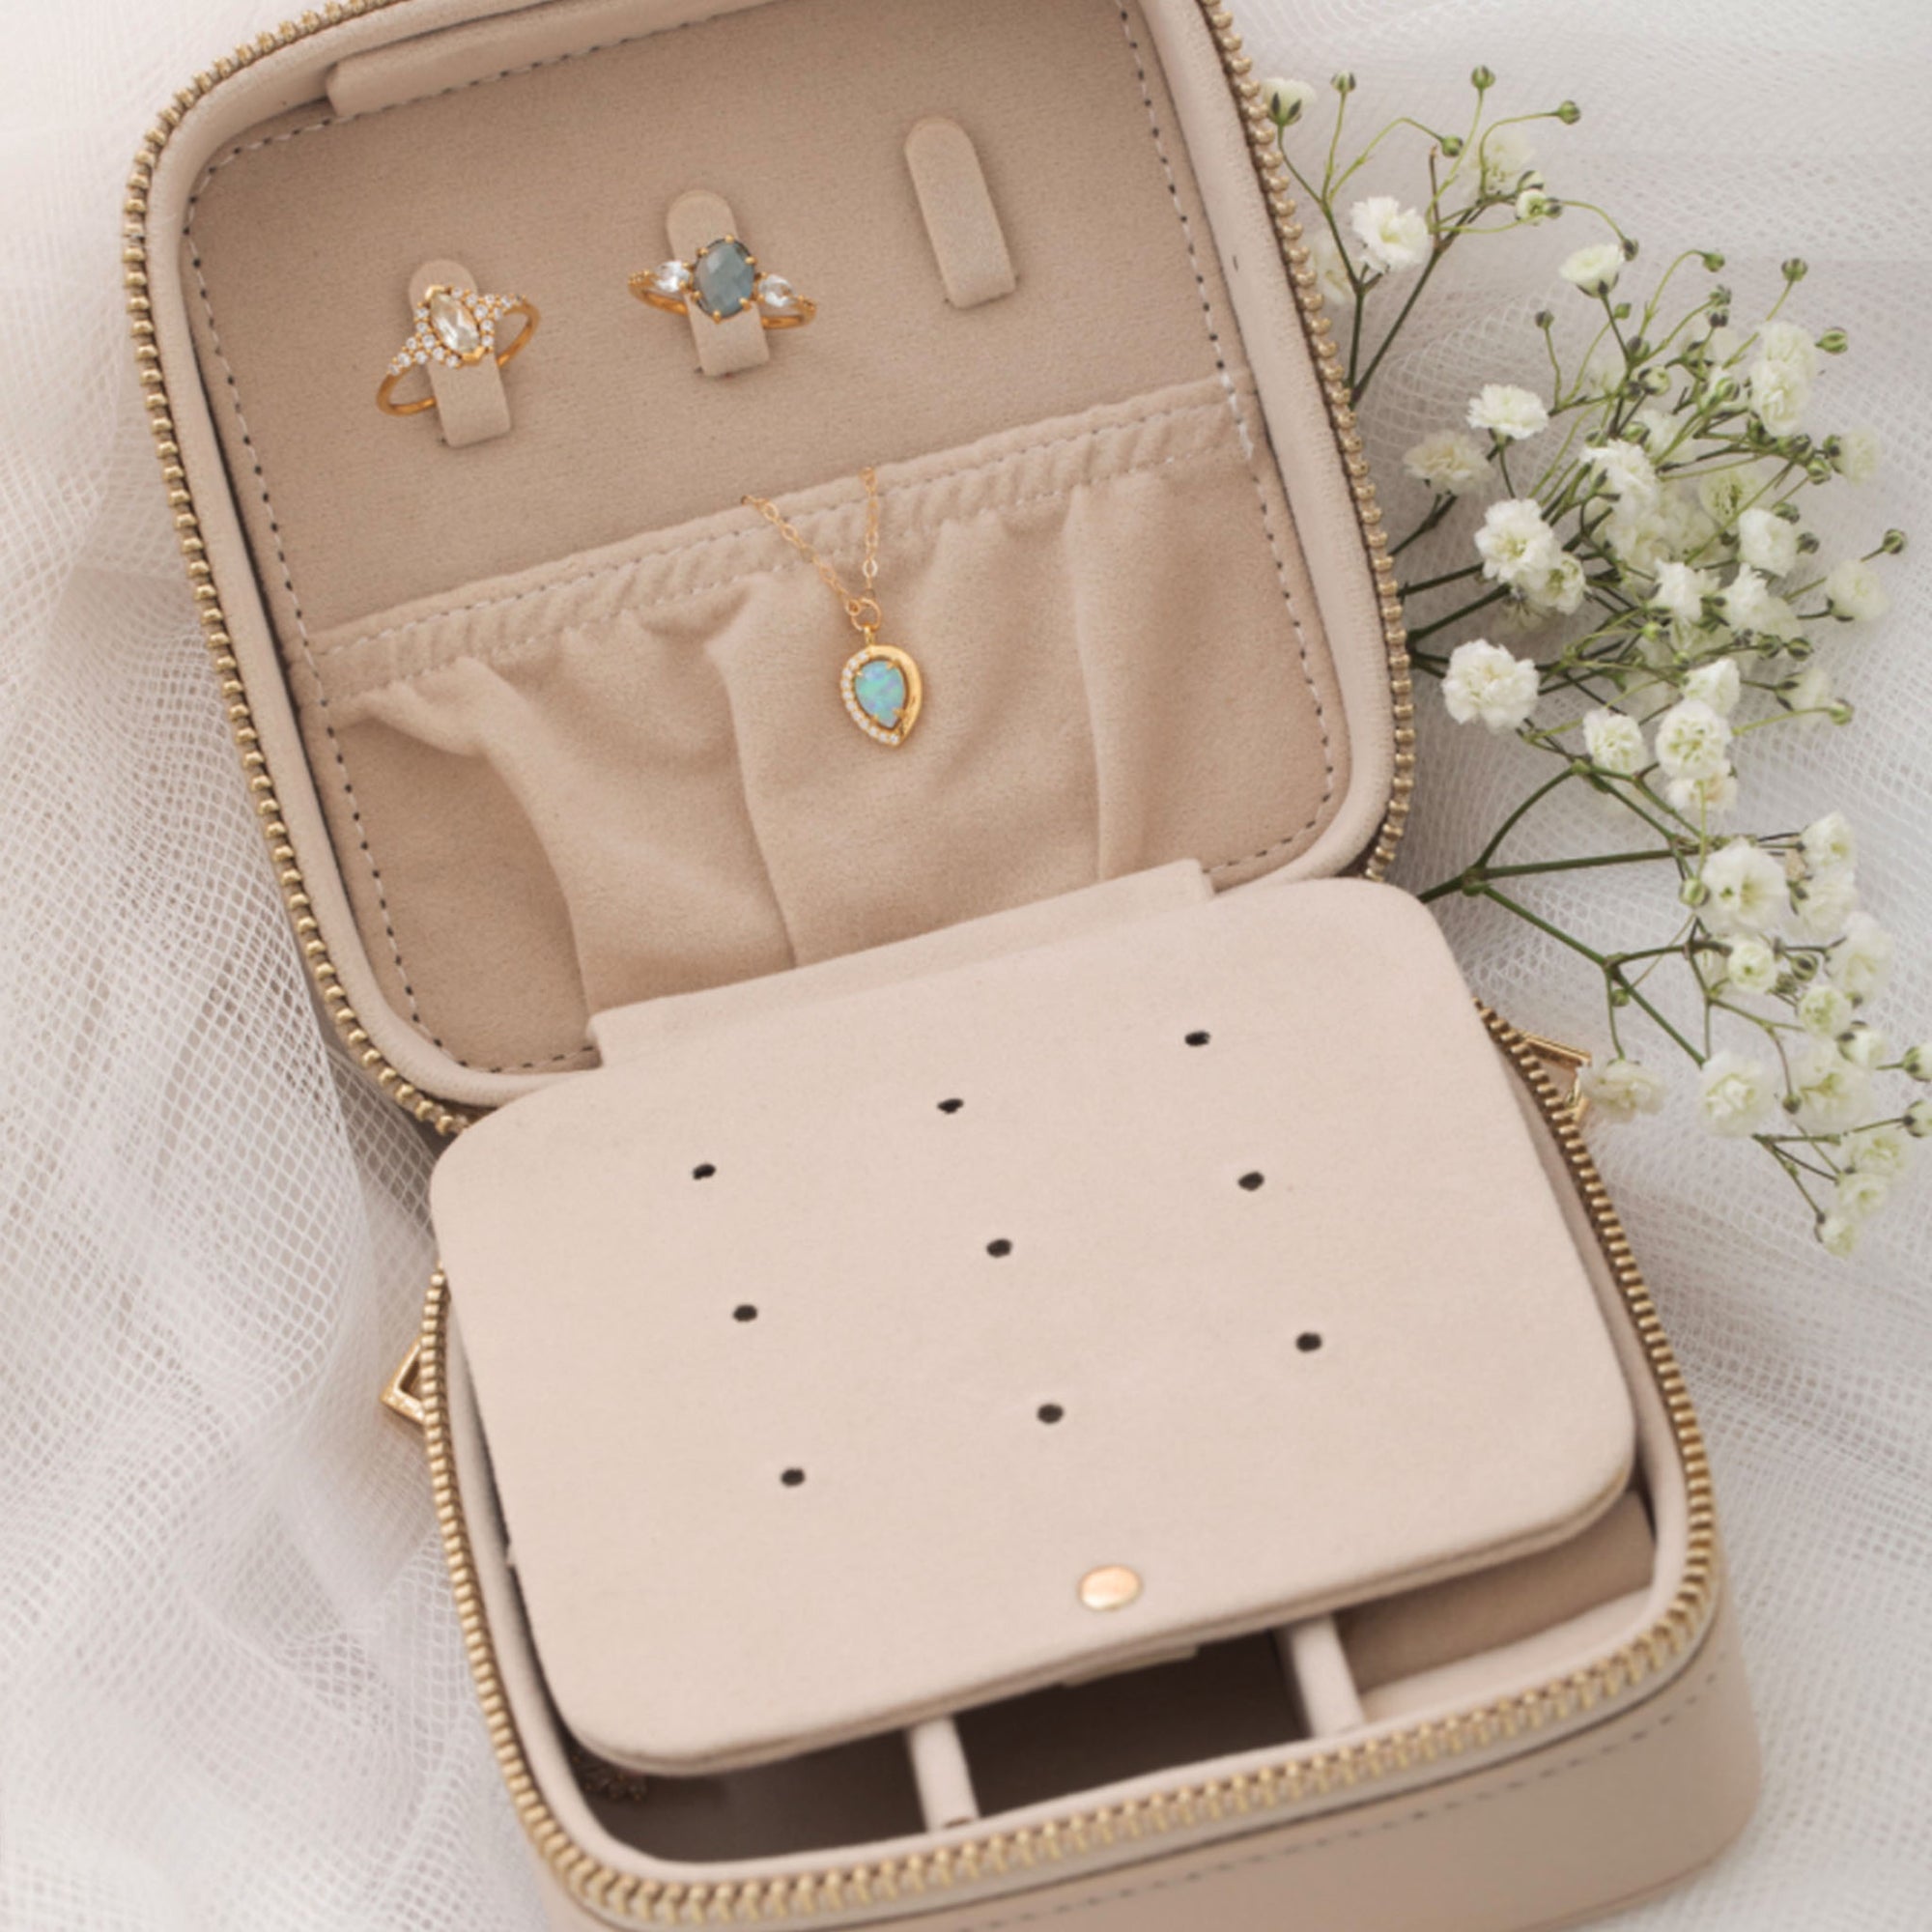 La Kaiser Surprise Jewelry Case (with 3 Free Pieces of Jewelry)